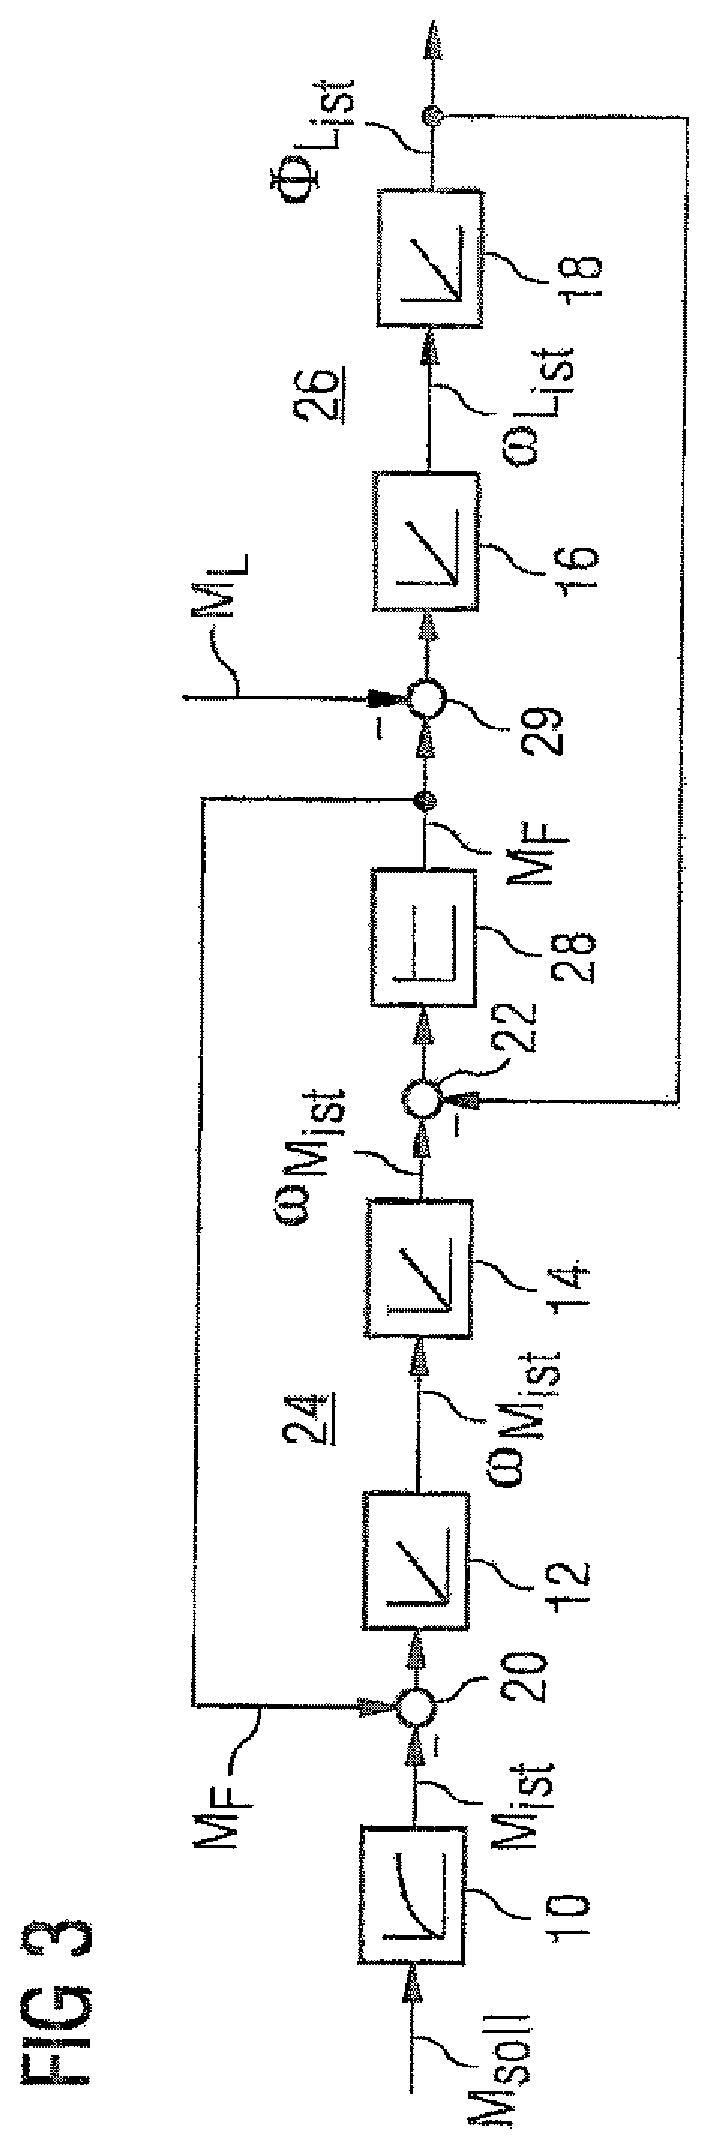 Attenuation of load oscillations without additional measuring means on the load side